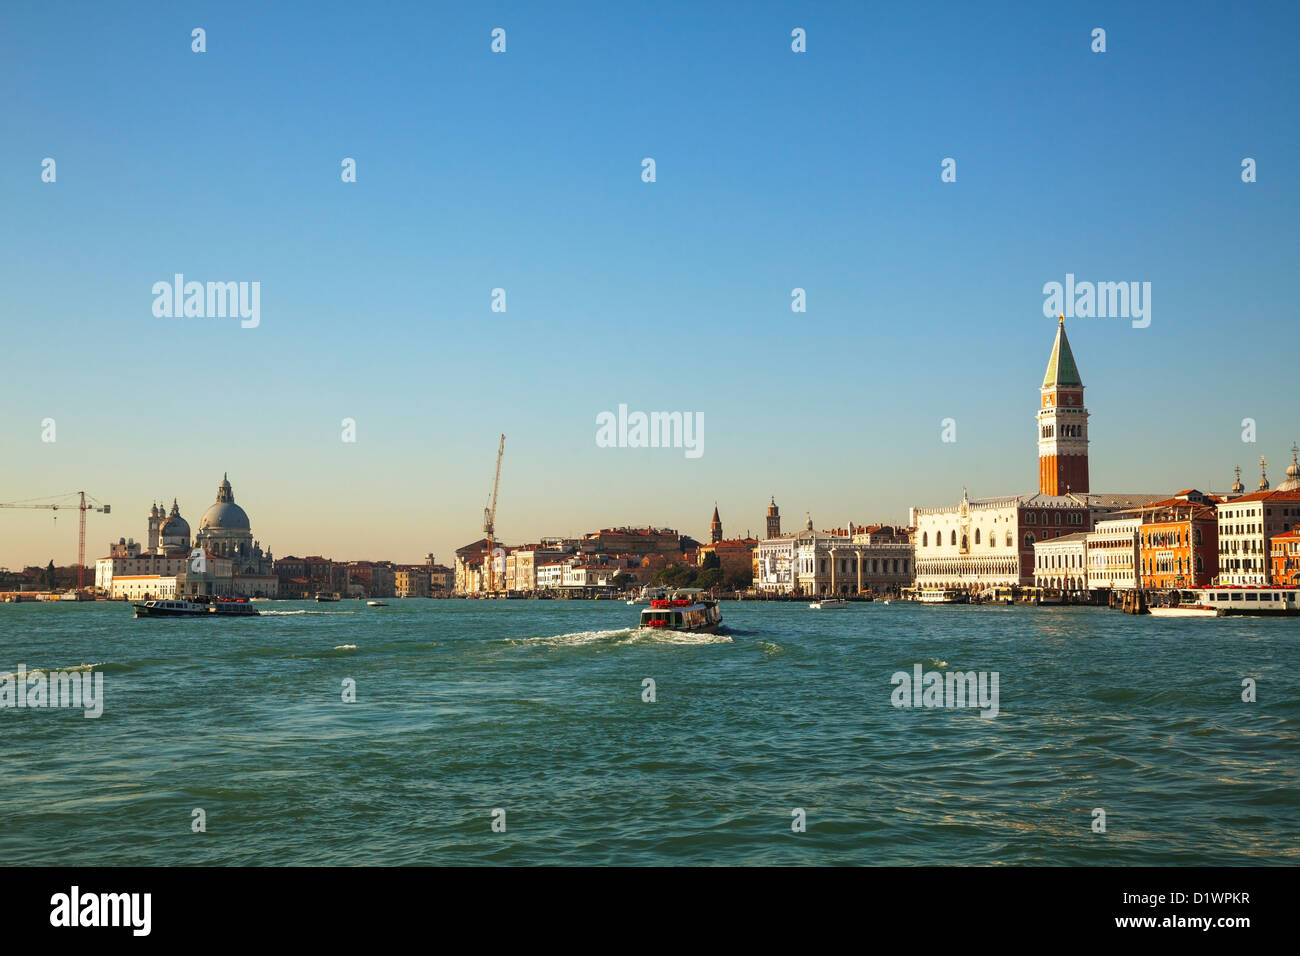 Venice as seen from the lagoon on December 11, 2012. Venice was founded in the 5th century and spread over 118 small islands. Stock Photo